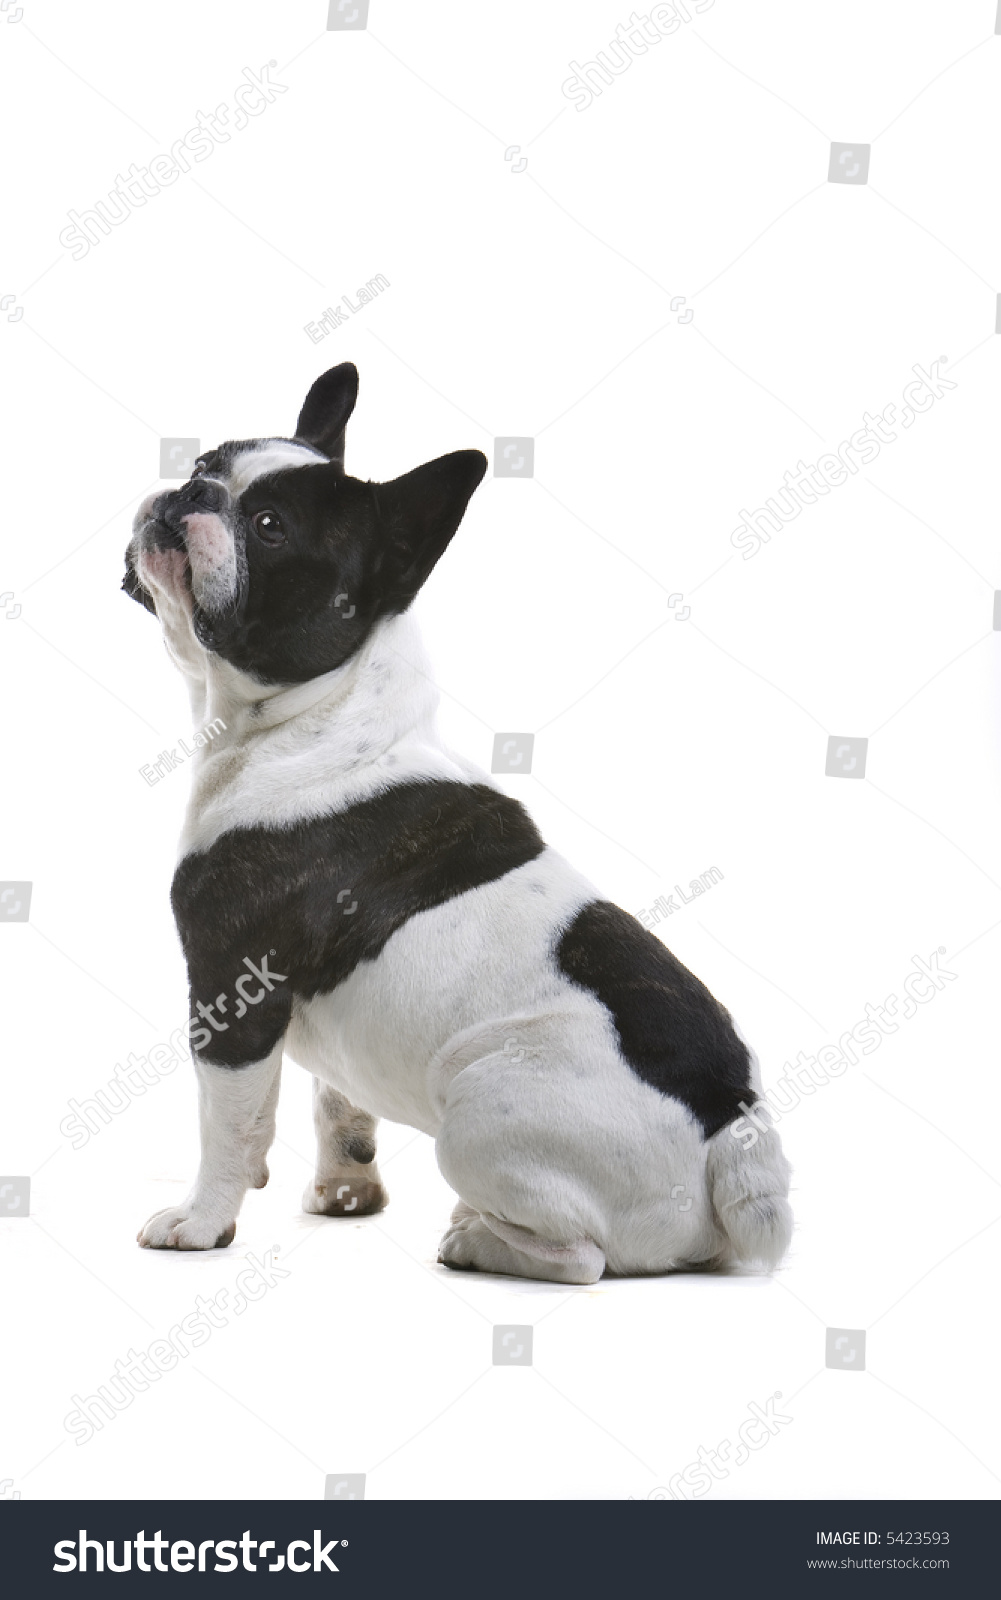 French Bulldog Sitting Down And Looking Up Stock Photo 5423593 ...